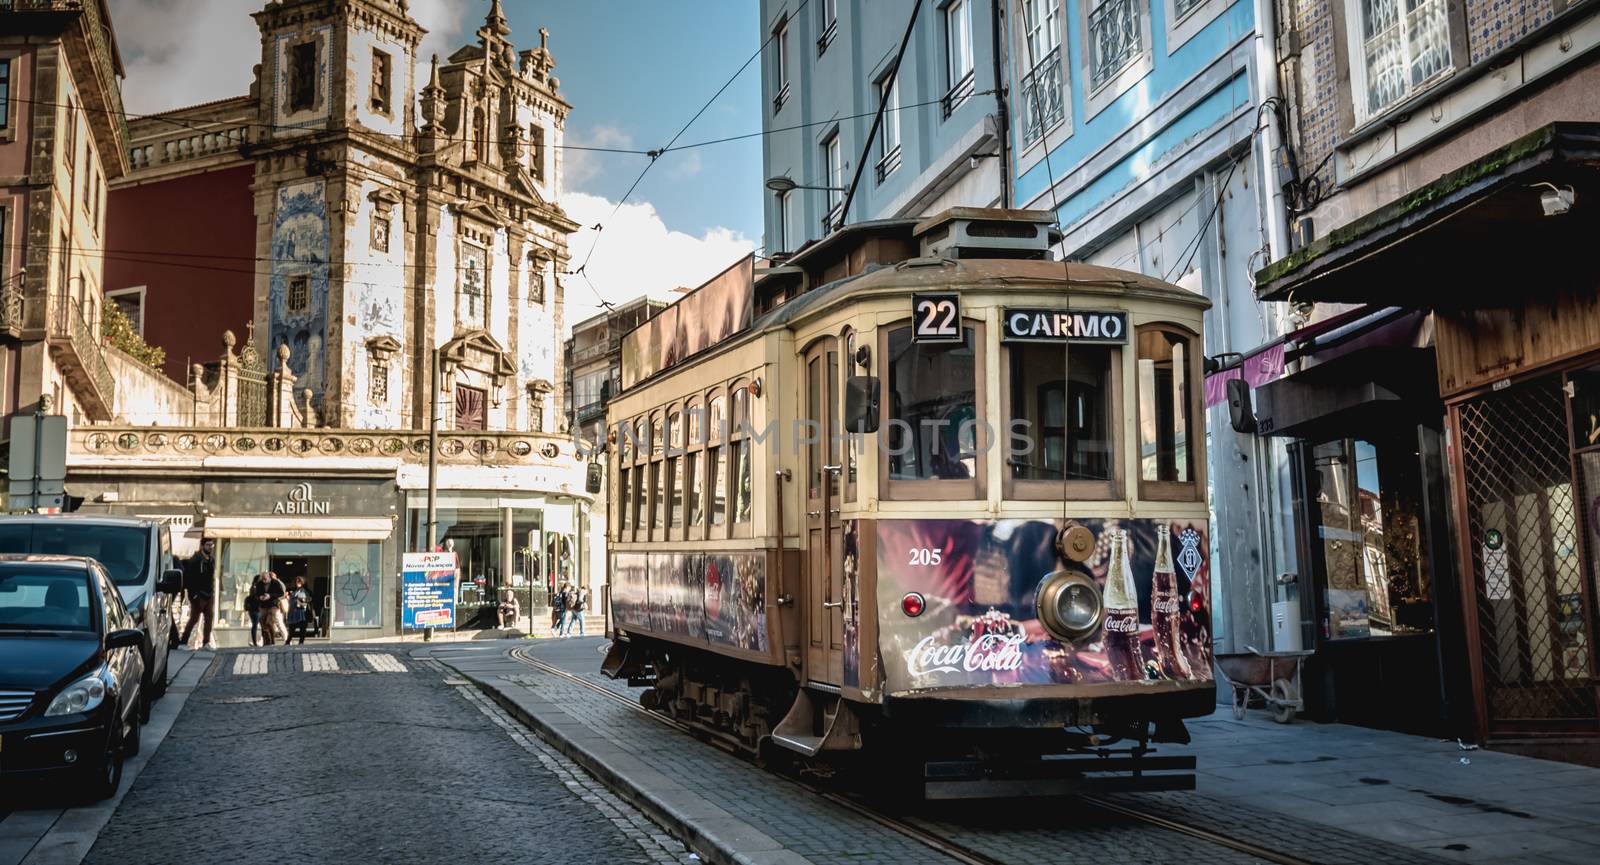 Porto, Portugal - November 30, 2018: Traditional electric tram flowing through the streets of the city on a fall day